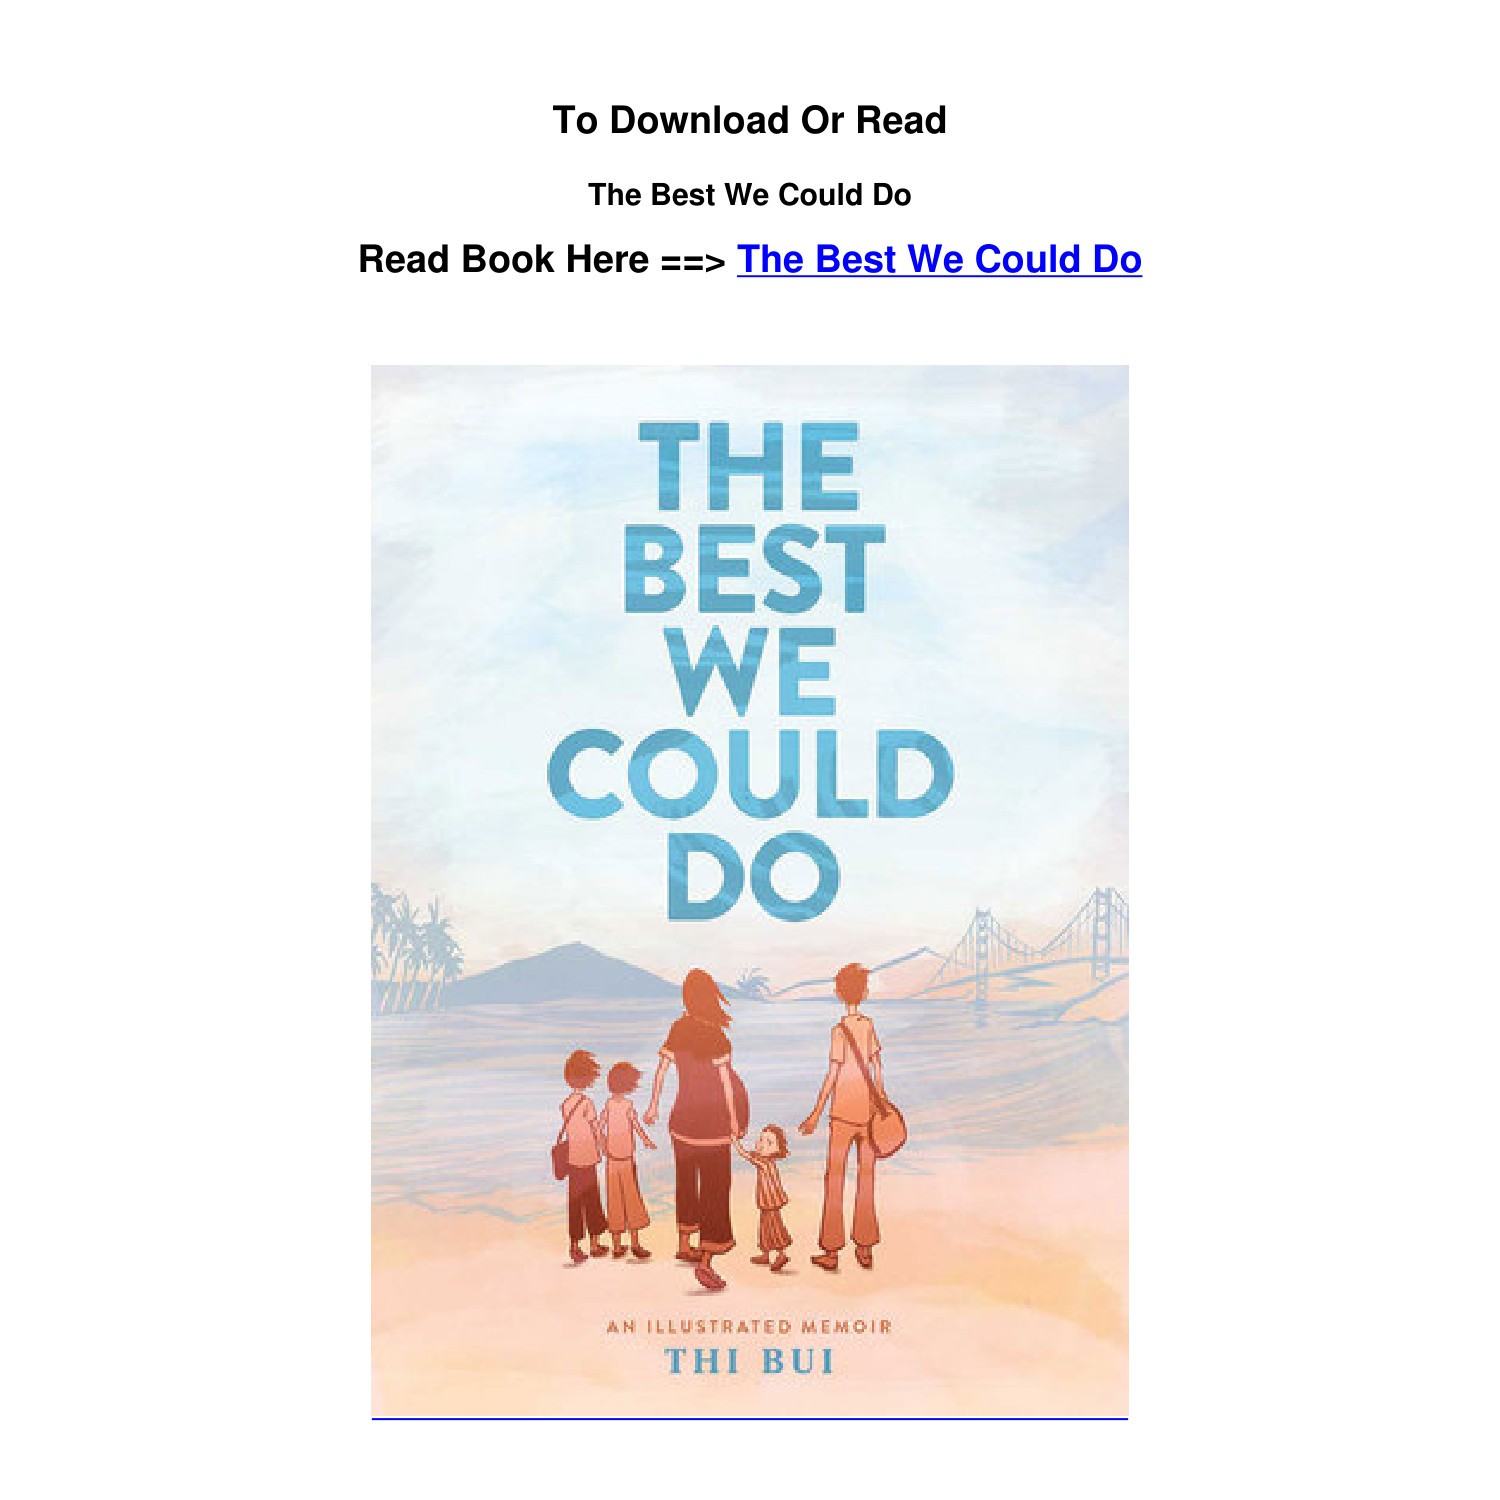 The best we could do thi bui pdf free download